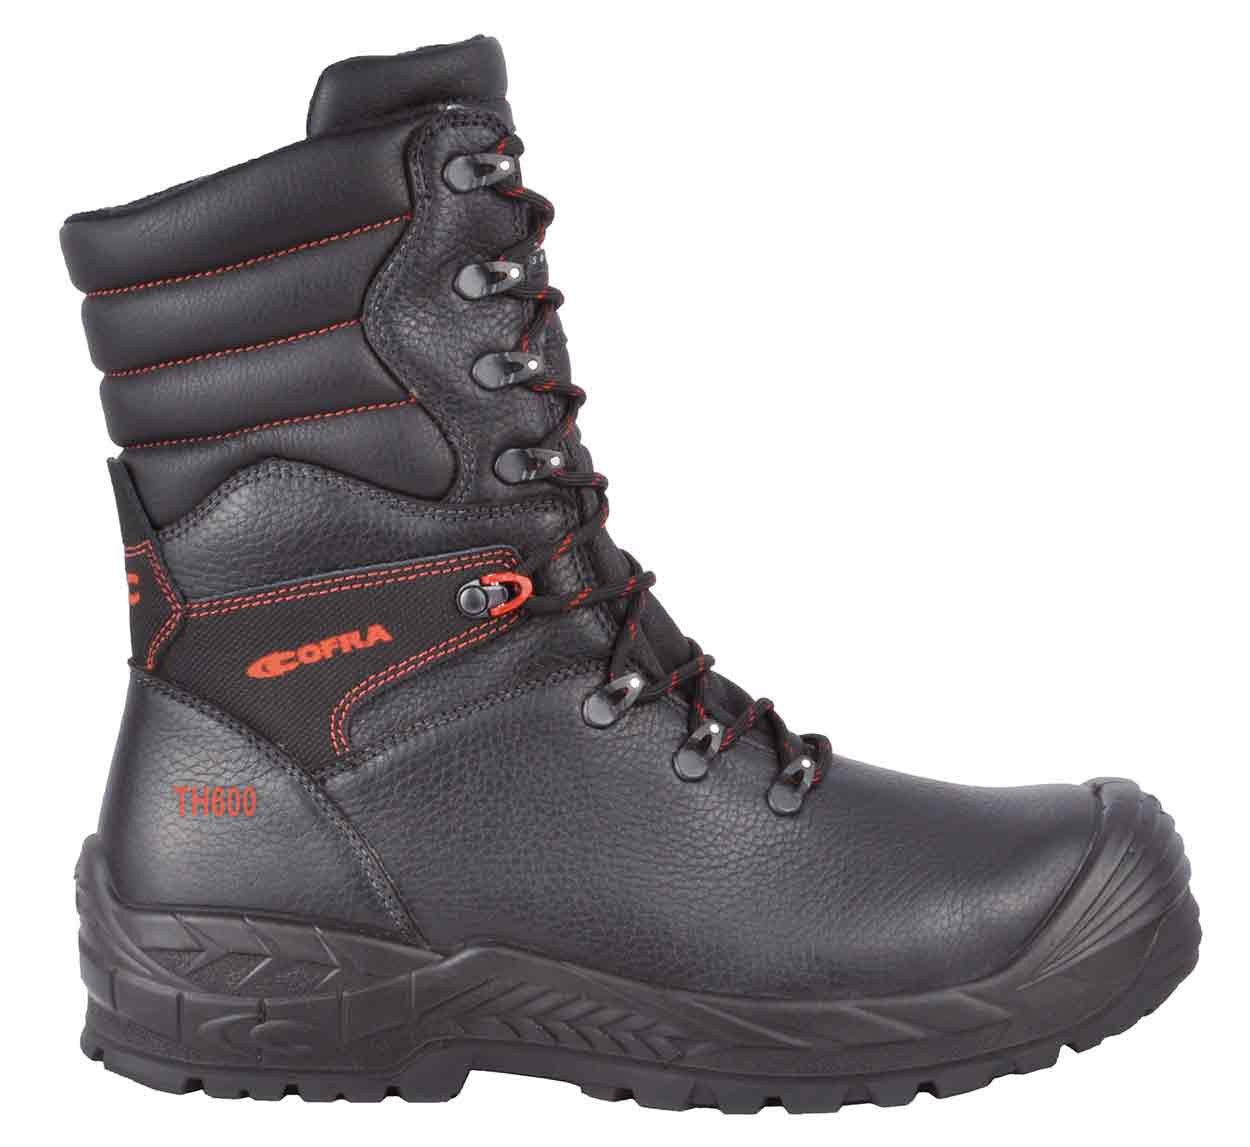 Cofra Muspell Thinsulate Winter Boot - Special Hazard Safety Boots - Mens Safety  Boots & Shoes - Safety Footwear - Best Workwear